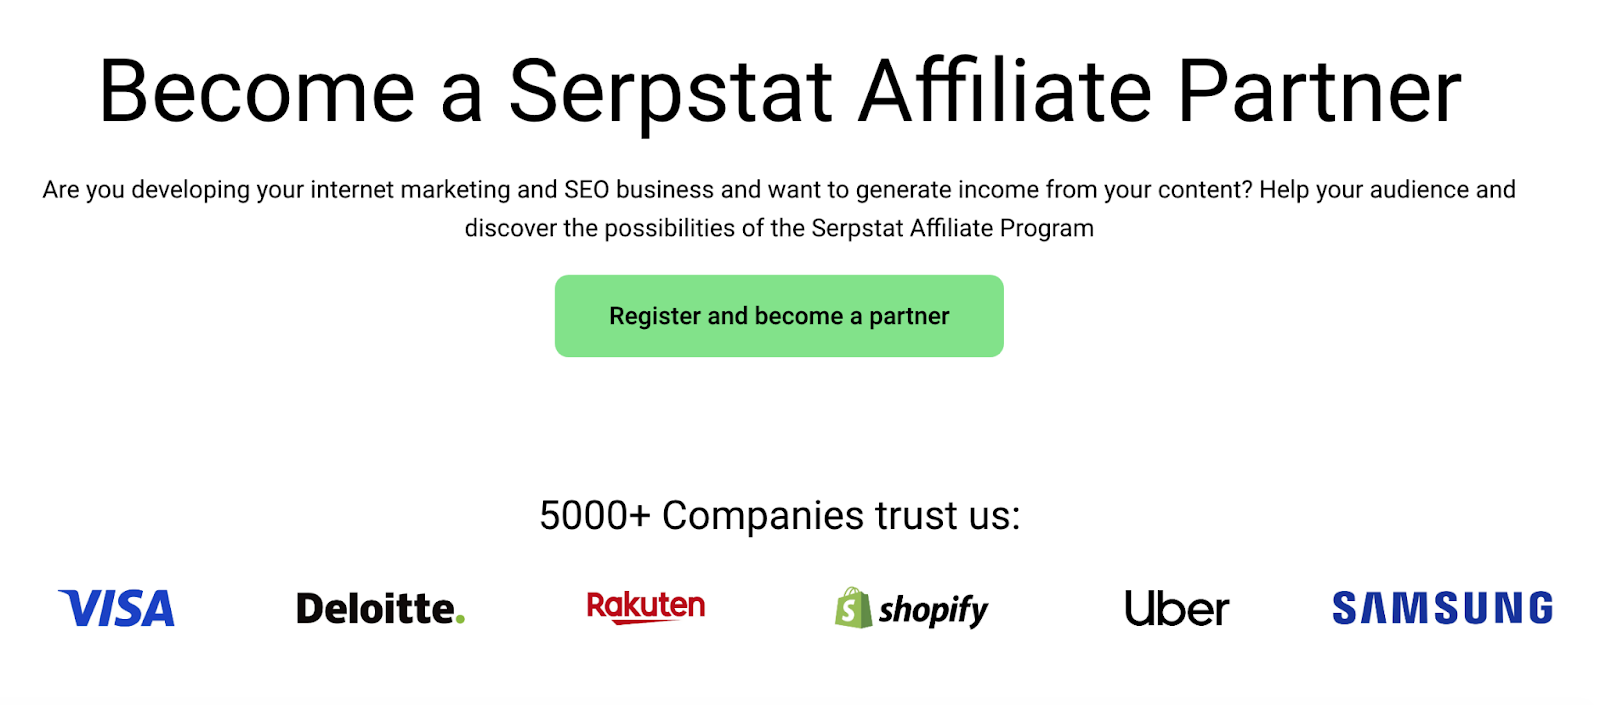 "Become a Serpstat Affiliate Partner" section of the page